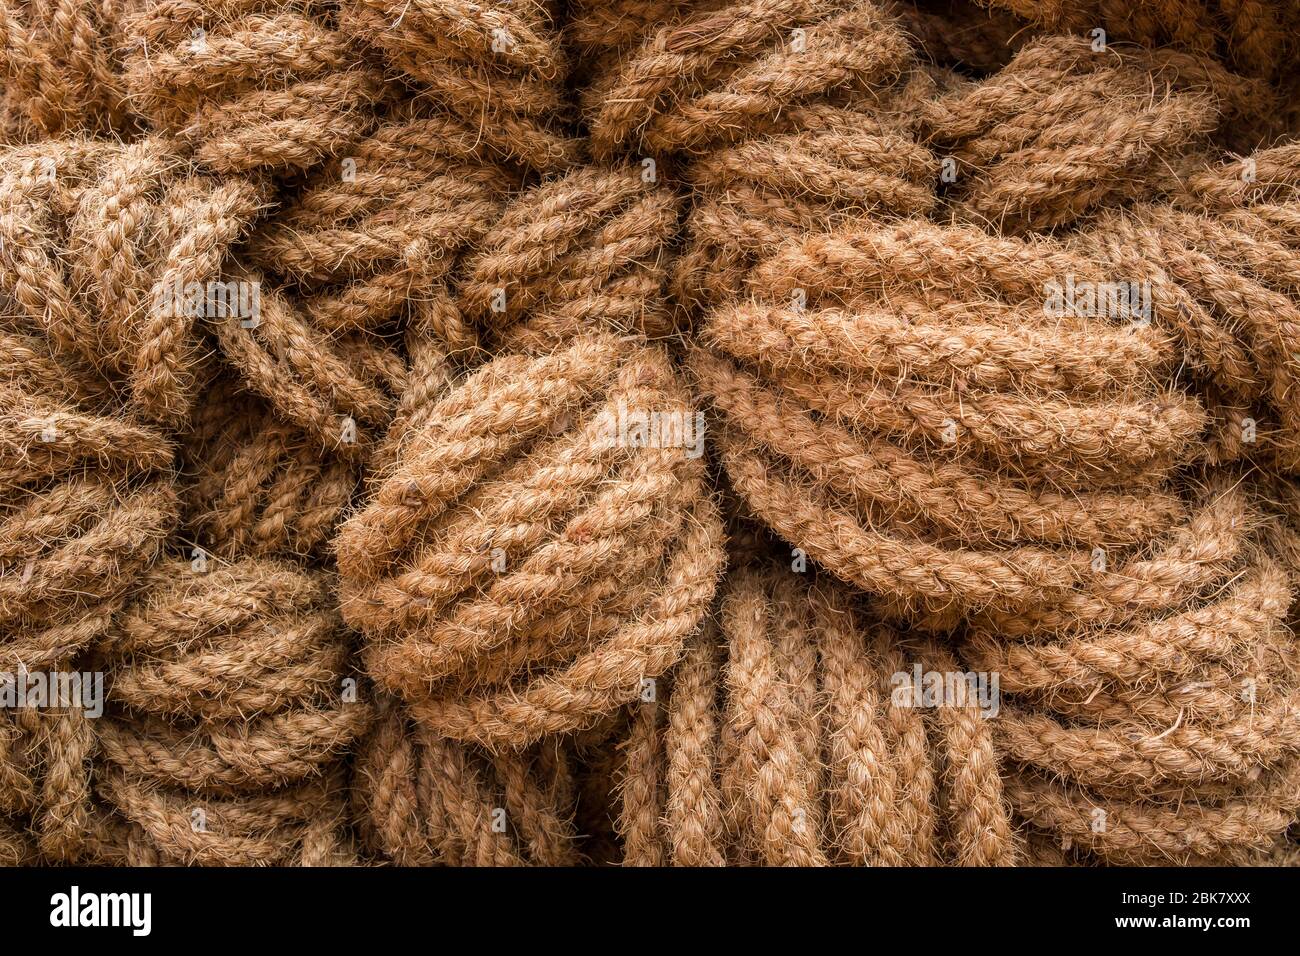 Tangled rope texture closeup on the indian market Stock Photo